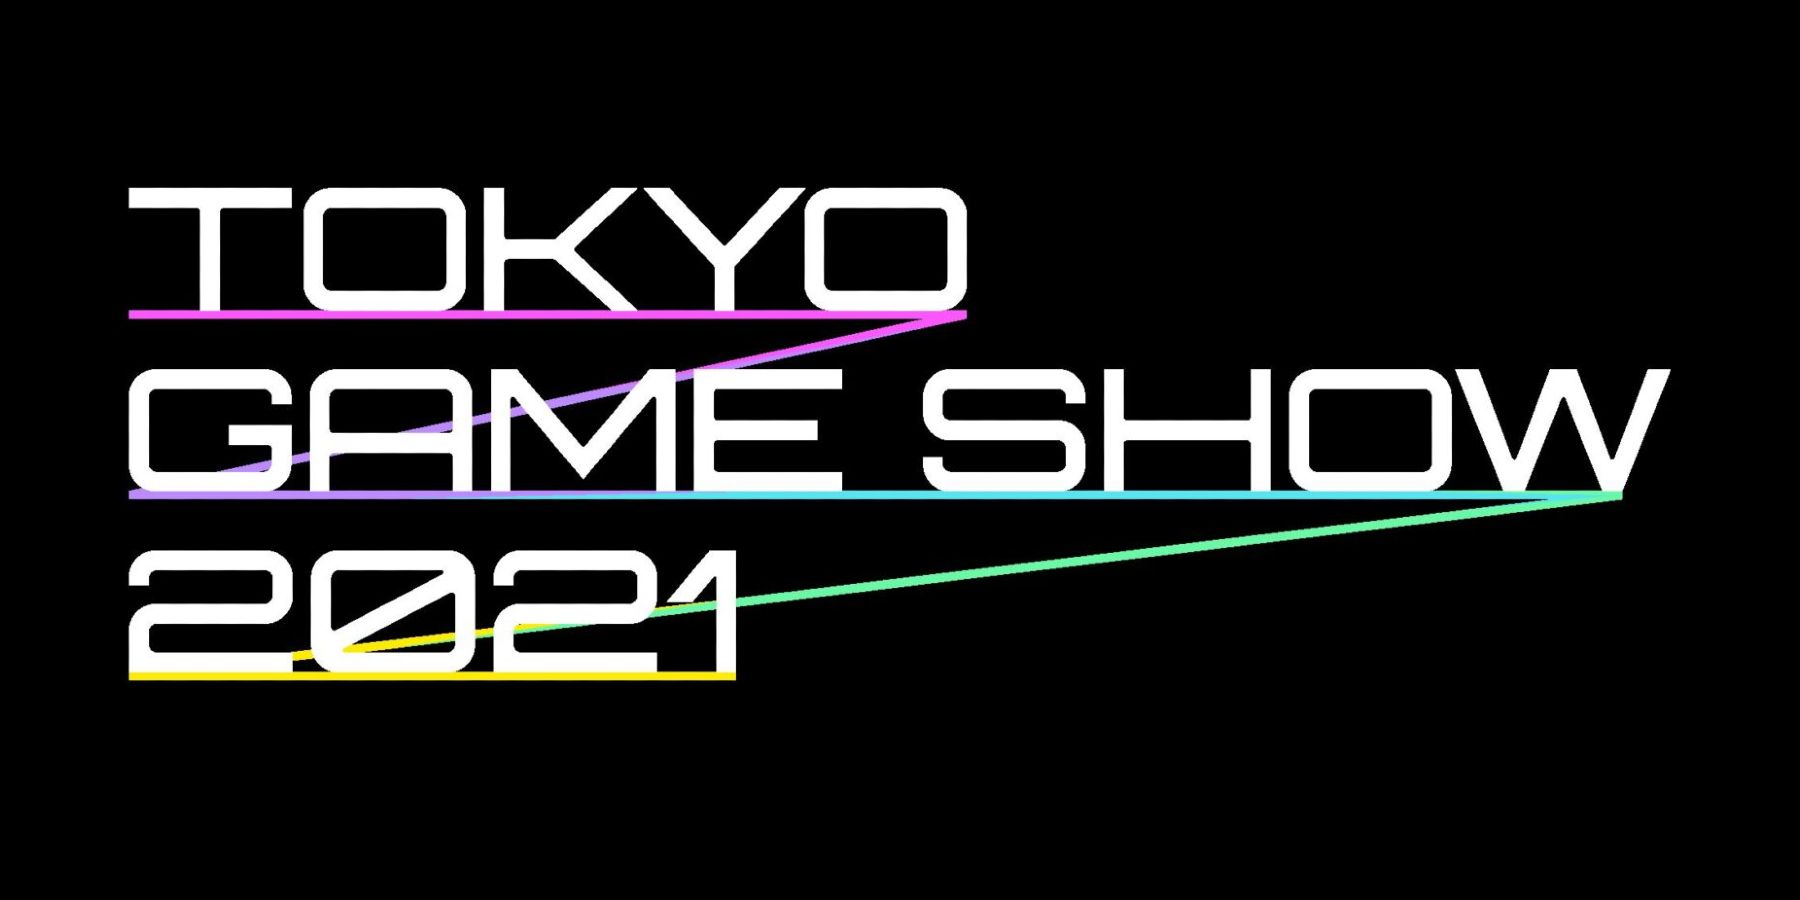 Tokyo Game Show 2021 Everything We Know About the Show So Far